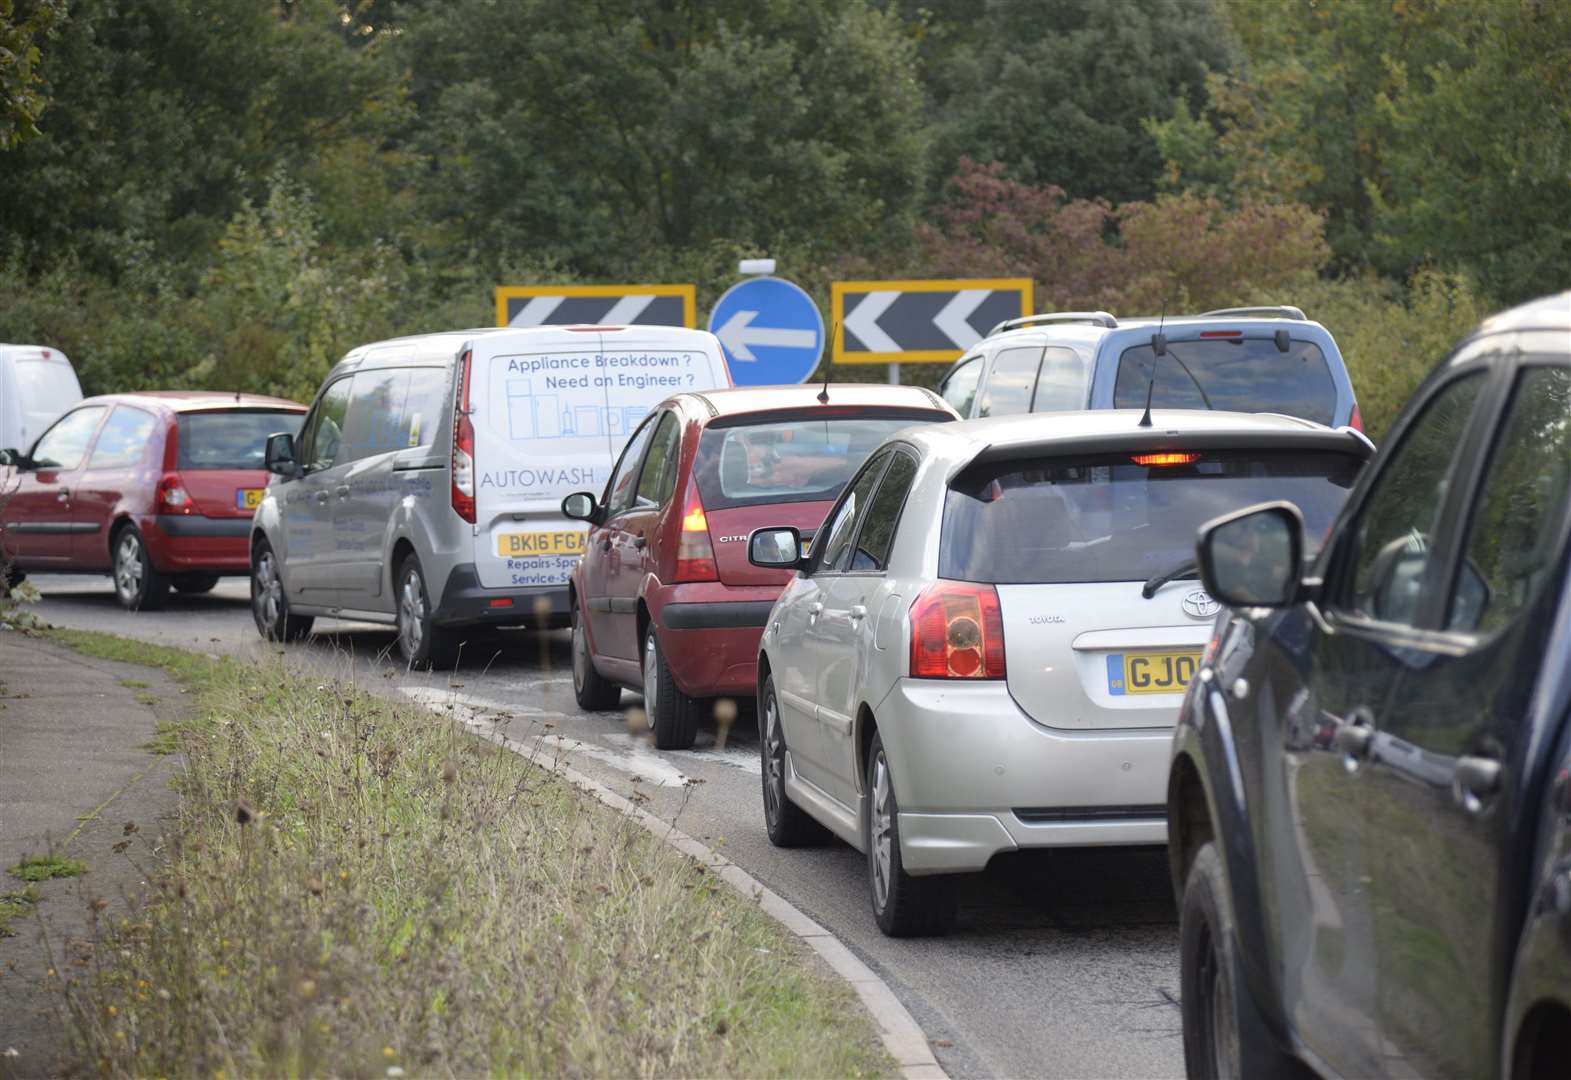 Days of traffic misery at notorious roundabout